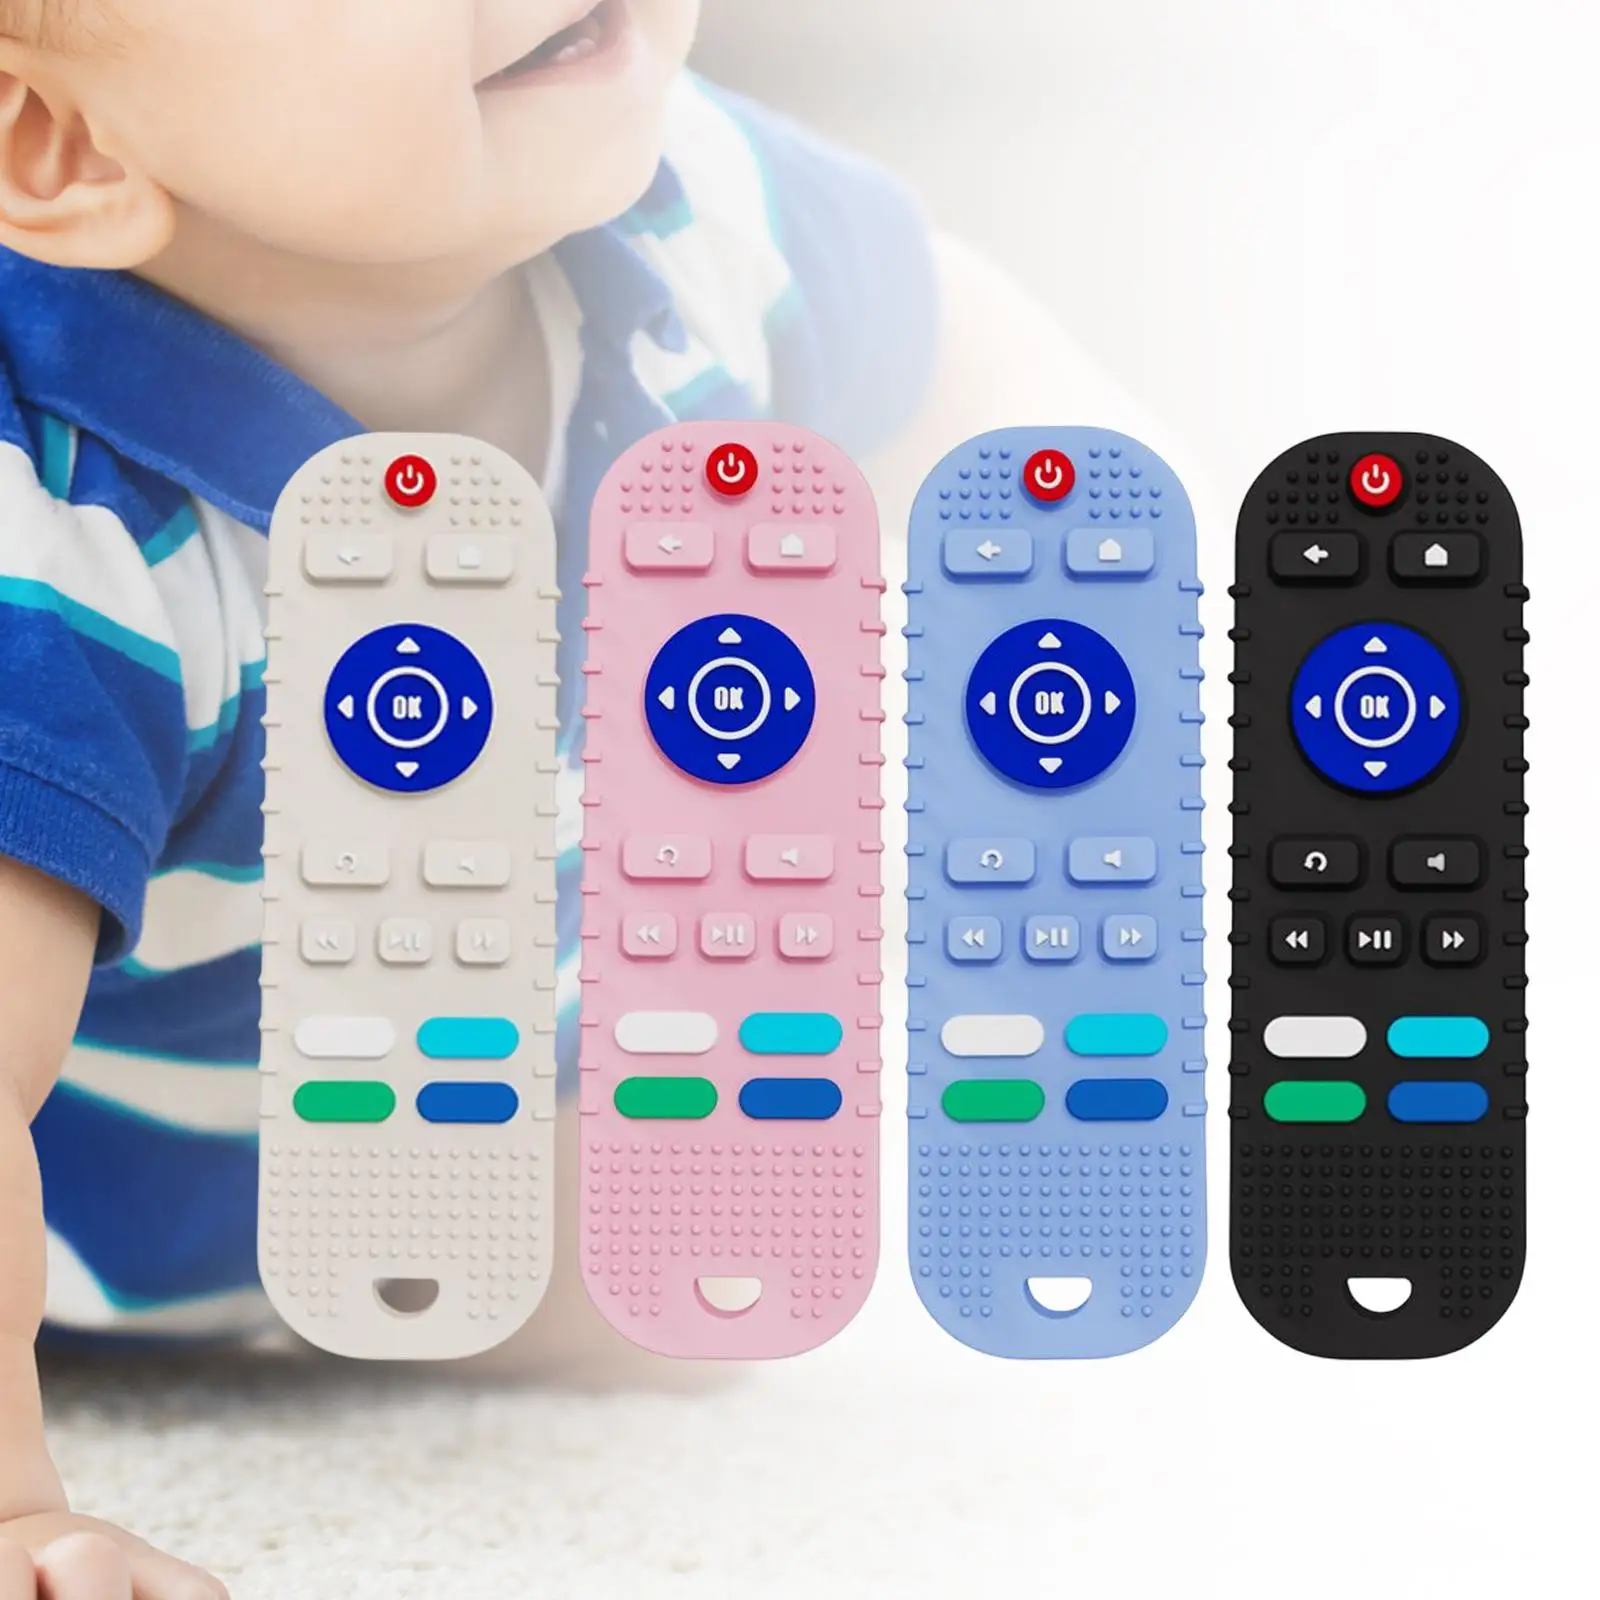 Remote Control Shape Teething Toys Educational Chewing Toy Silicone for Baby Babies 3-12 Months Girls Toddlers Infant